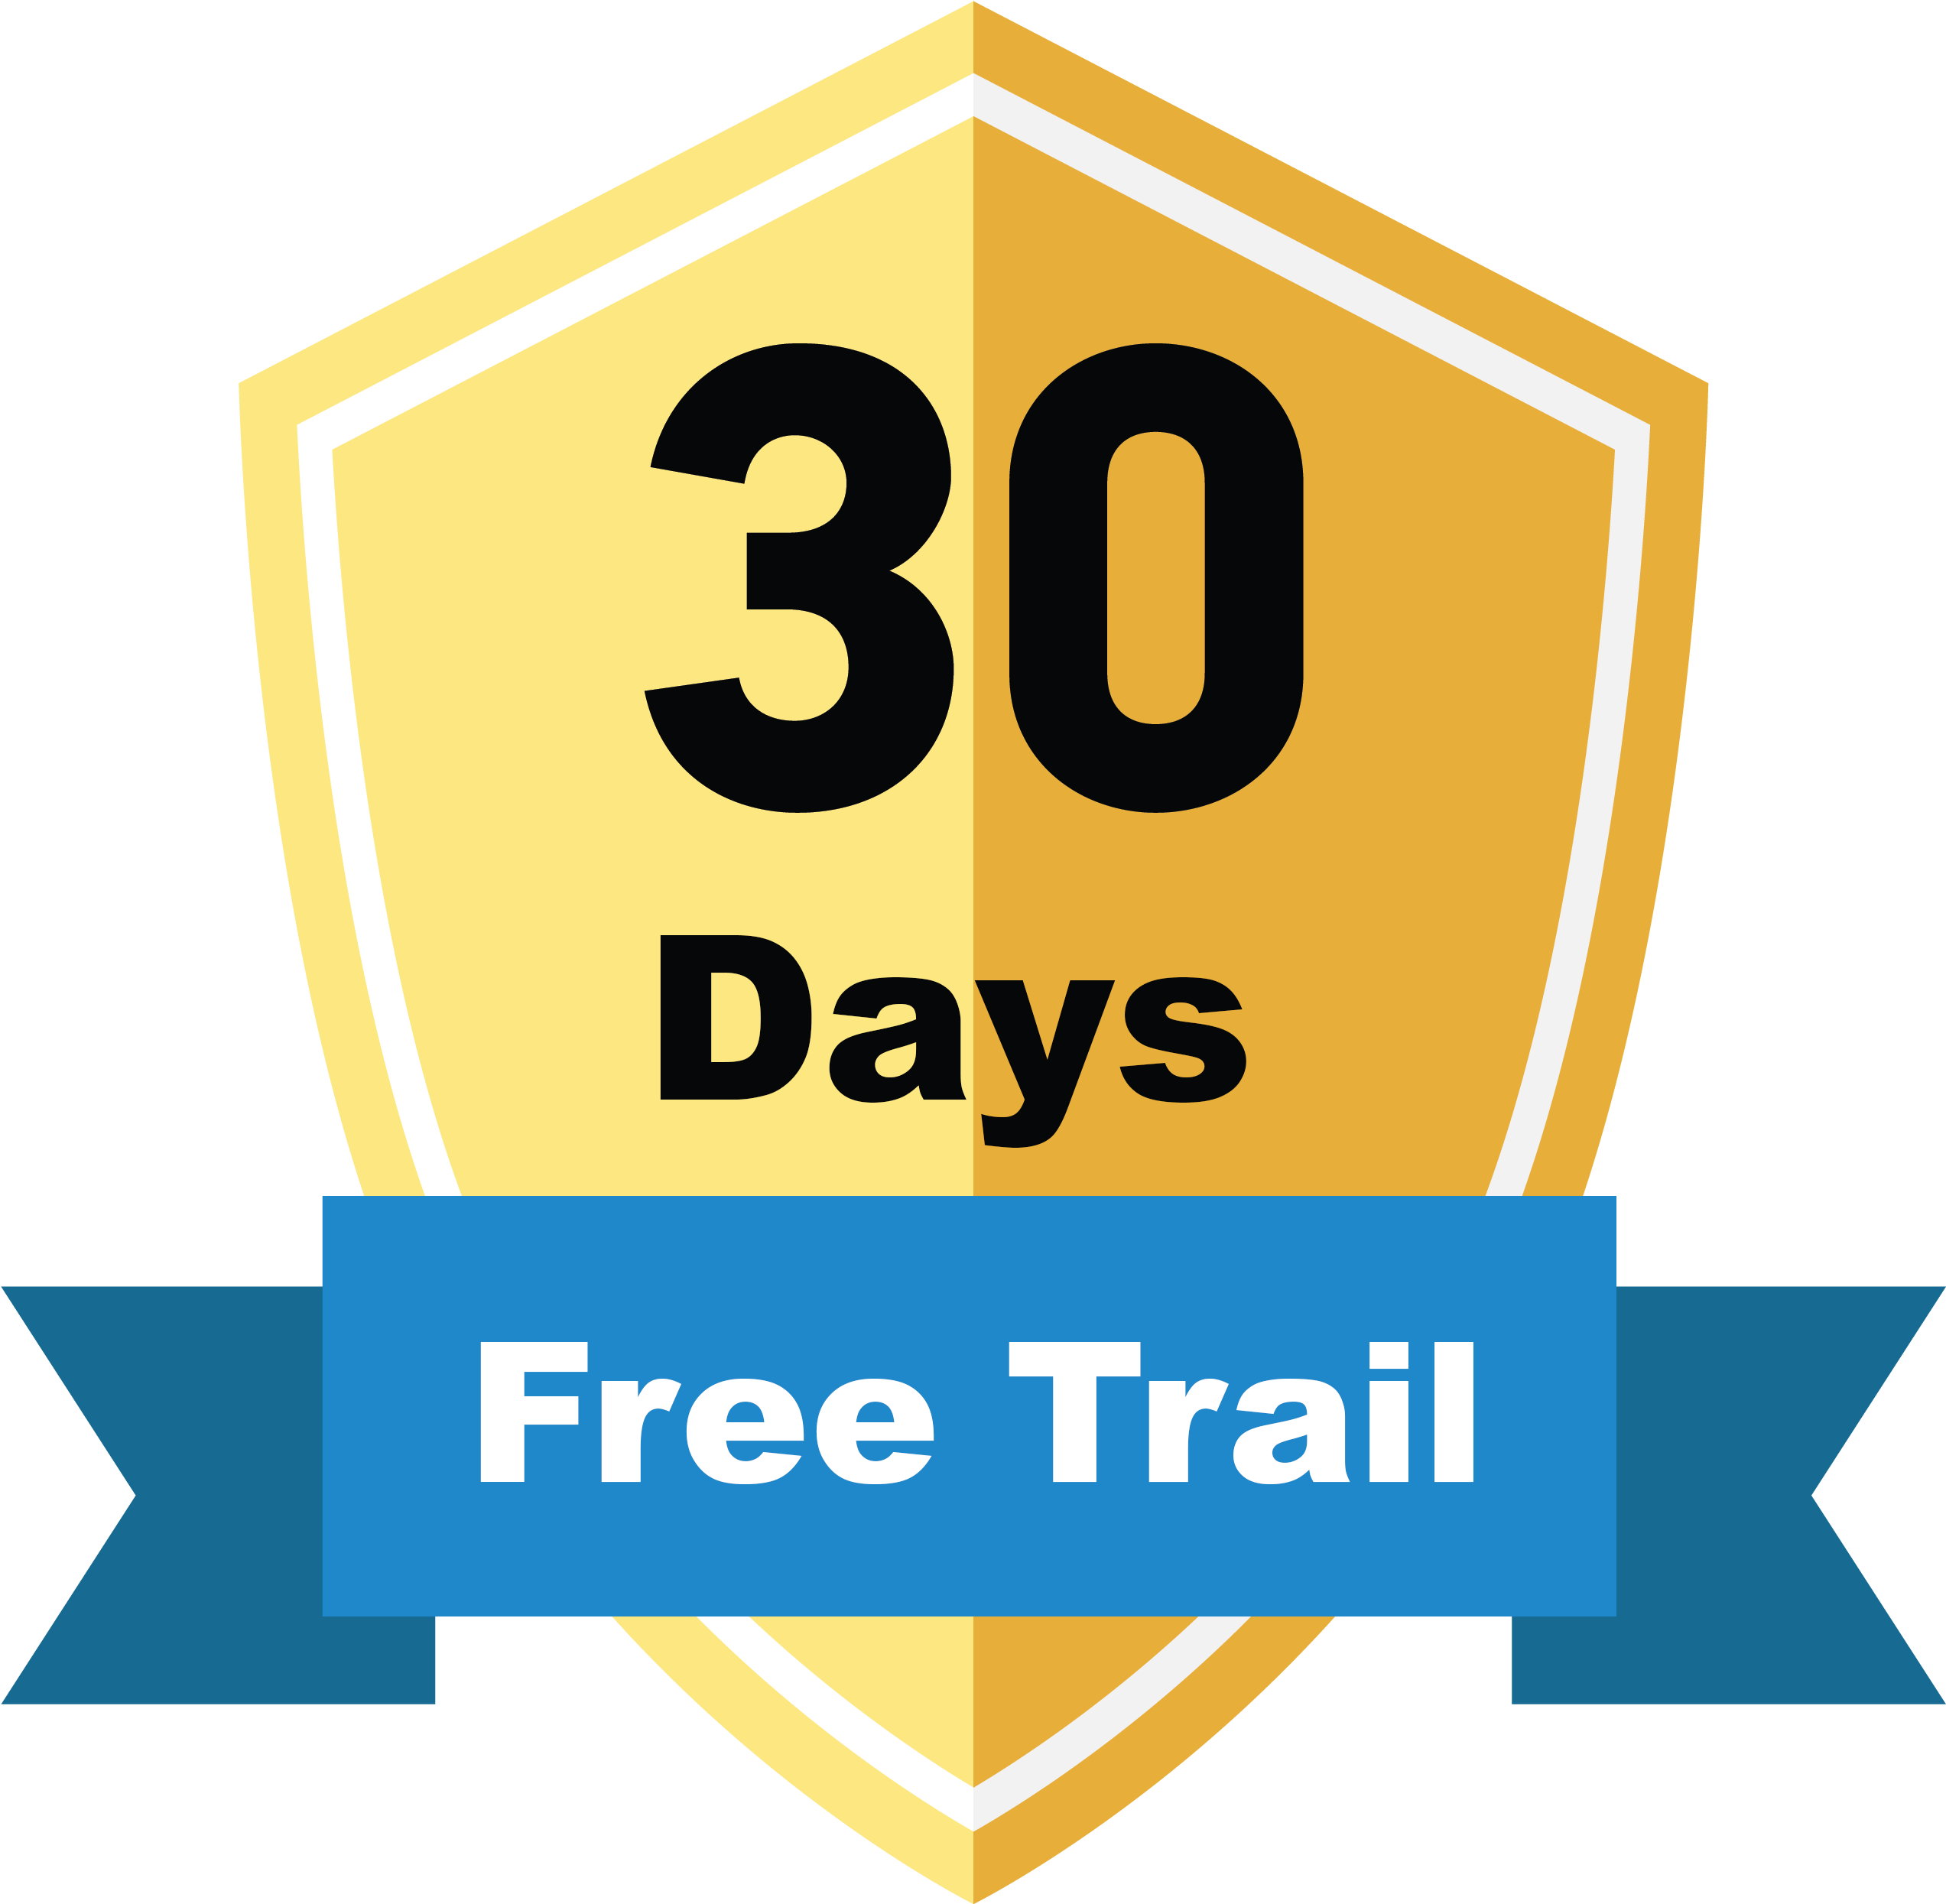 30 days completely free